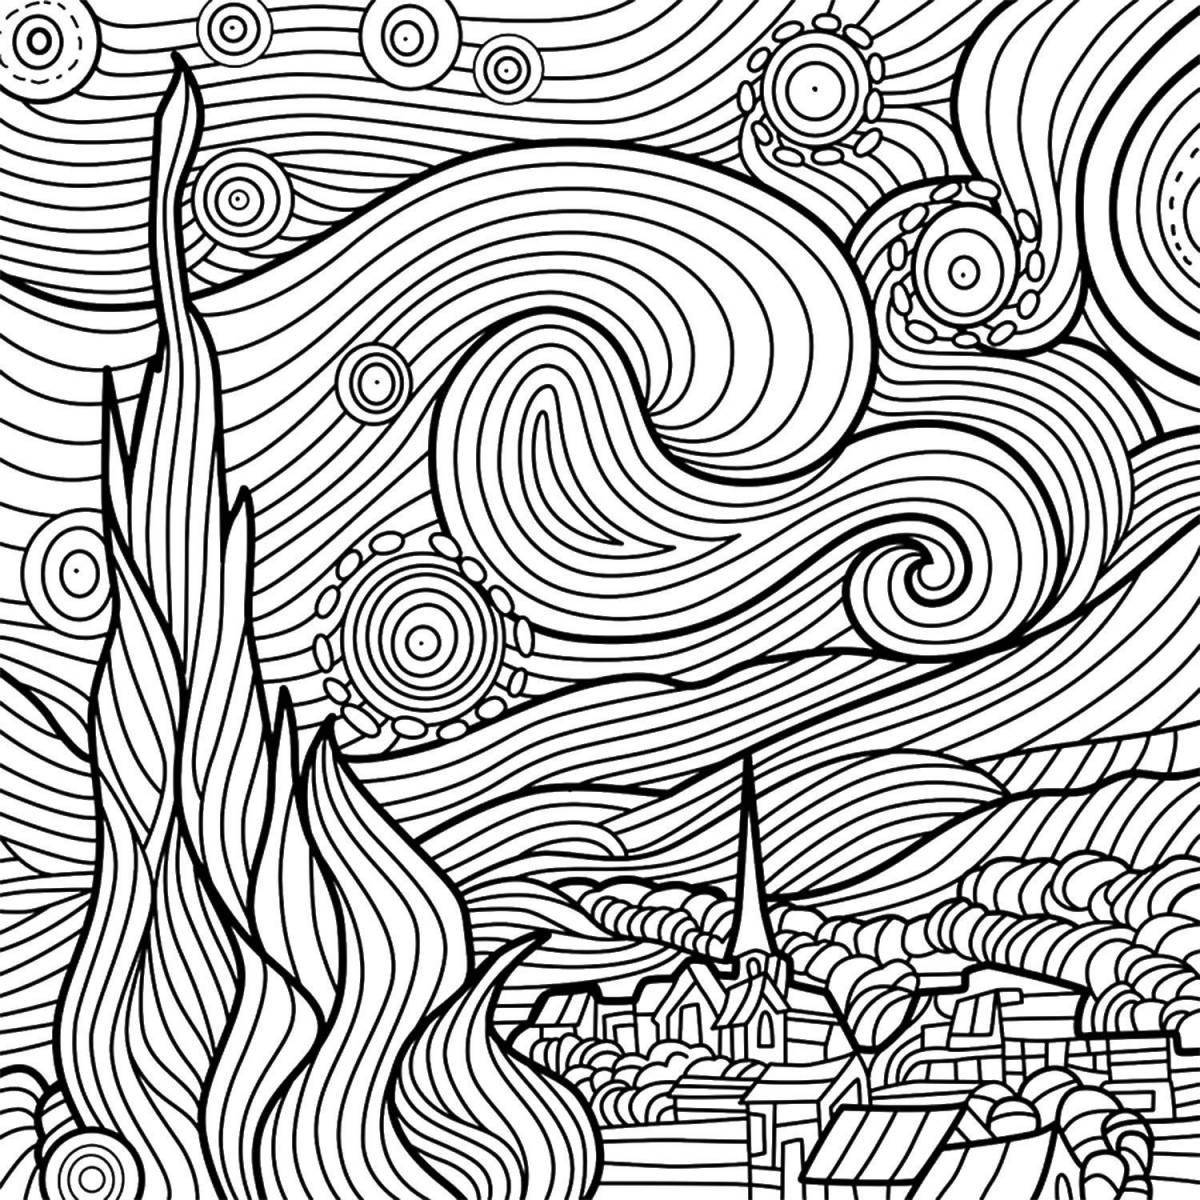 Consolation coloring book for adults